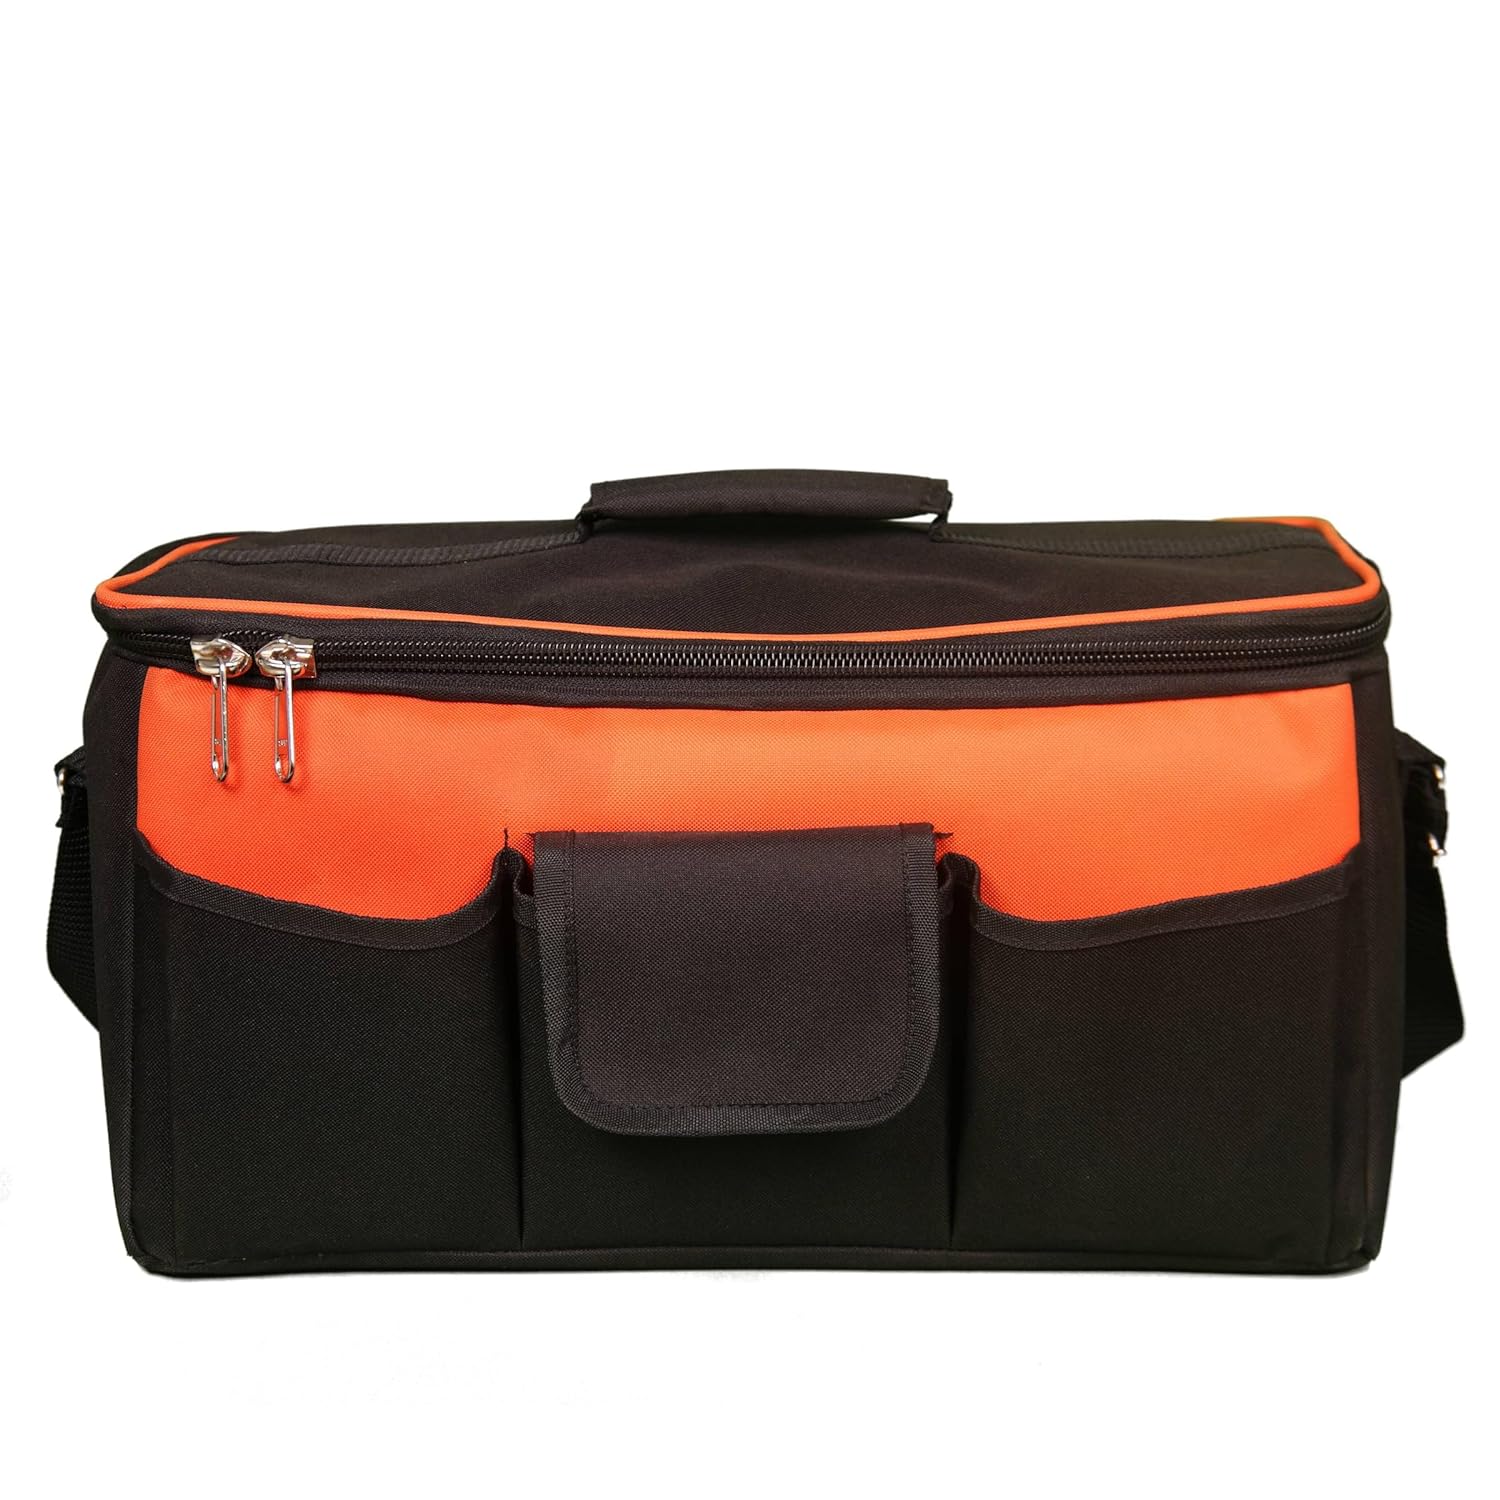 Pahal Nylon Tool Bag For Electrician, Technician, service Engineer,  Mechanic, Plumber and Carpenter